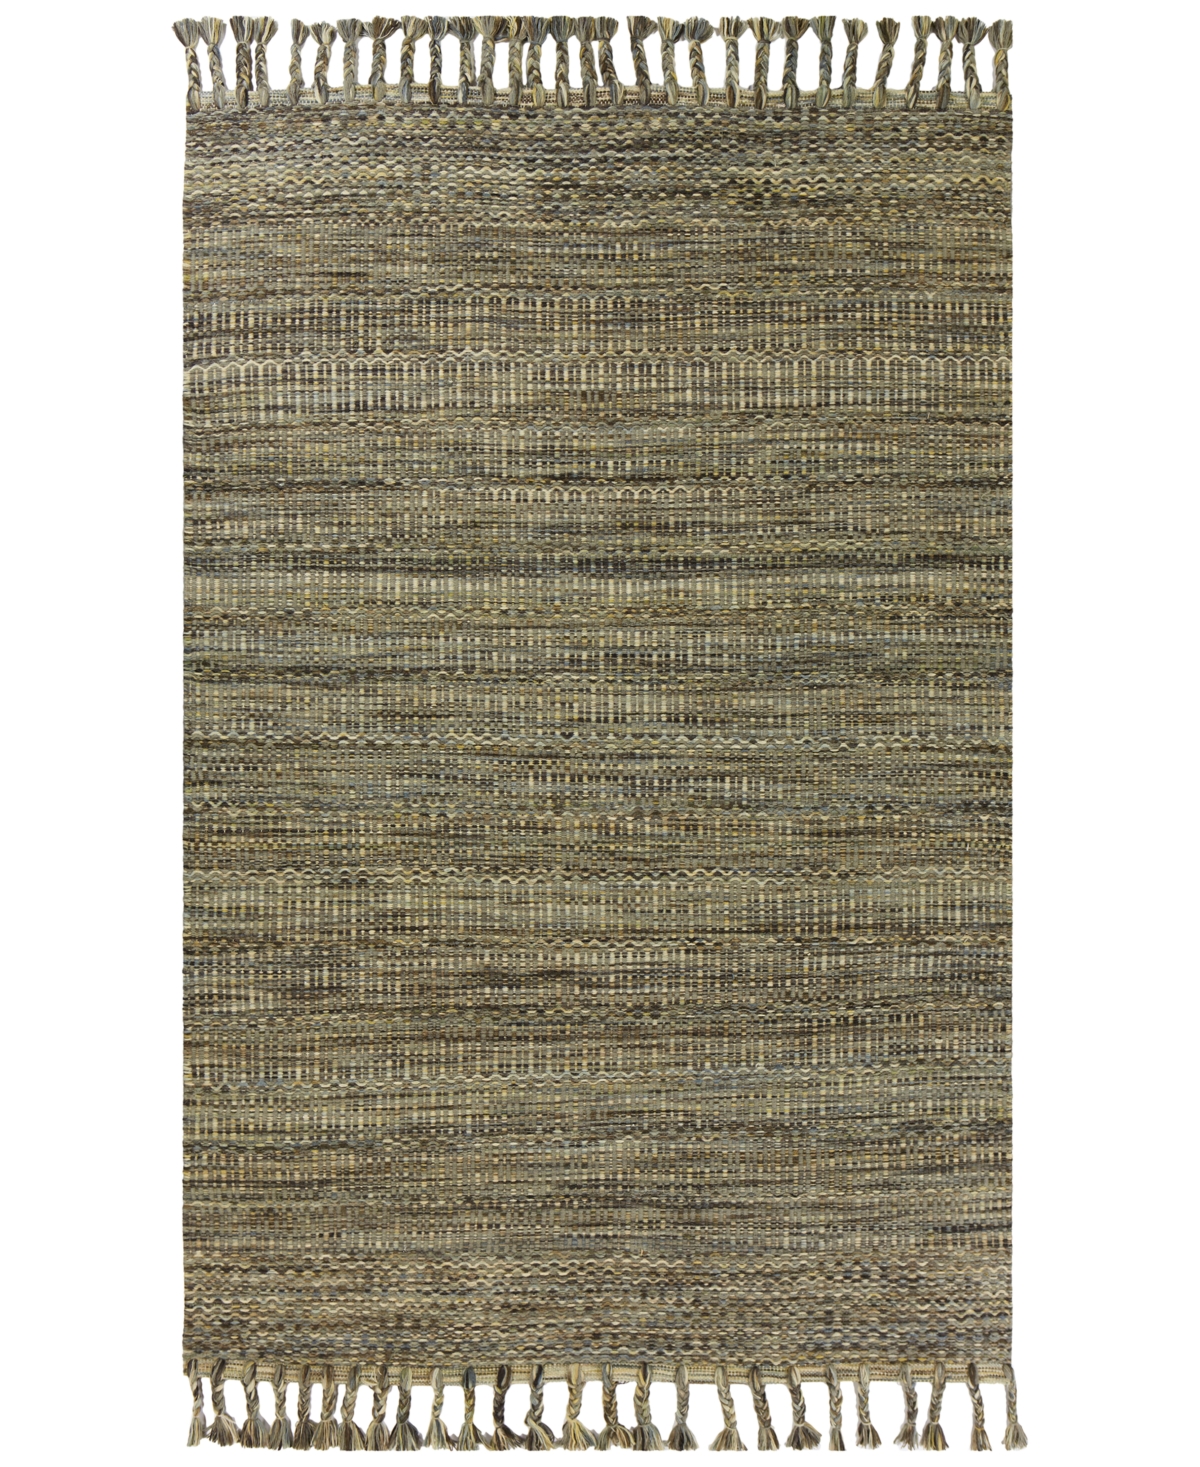 Libby Langdon Homespun Mission 8' X 10' Area Rug In Slate